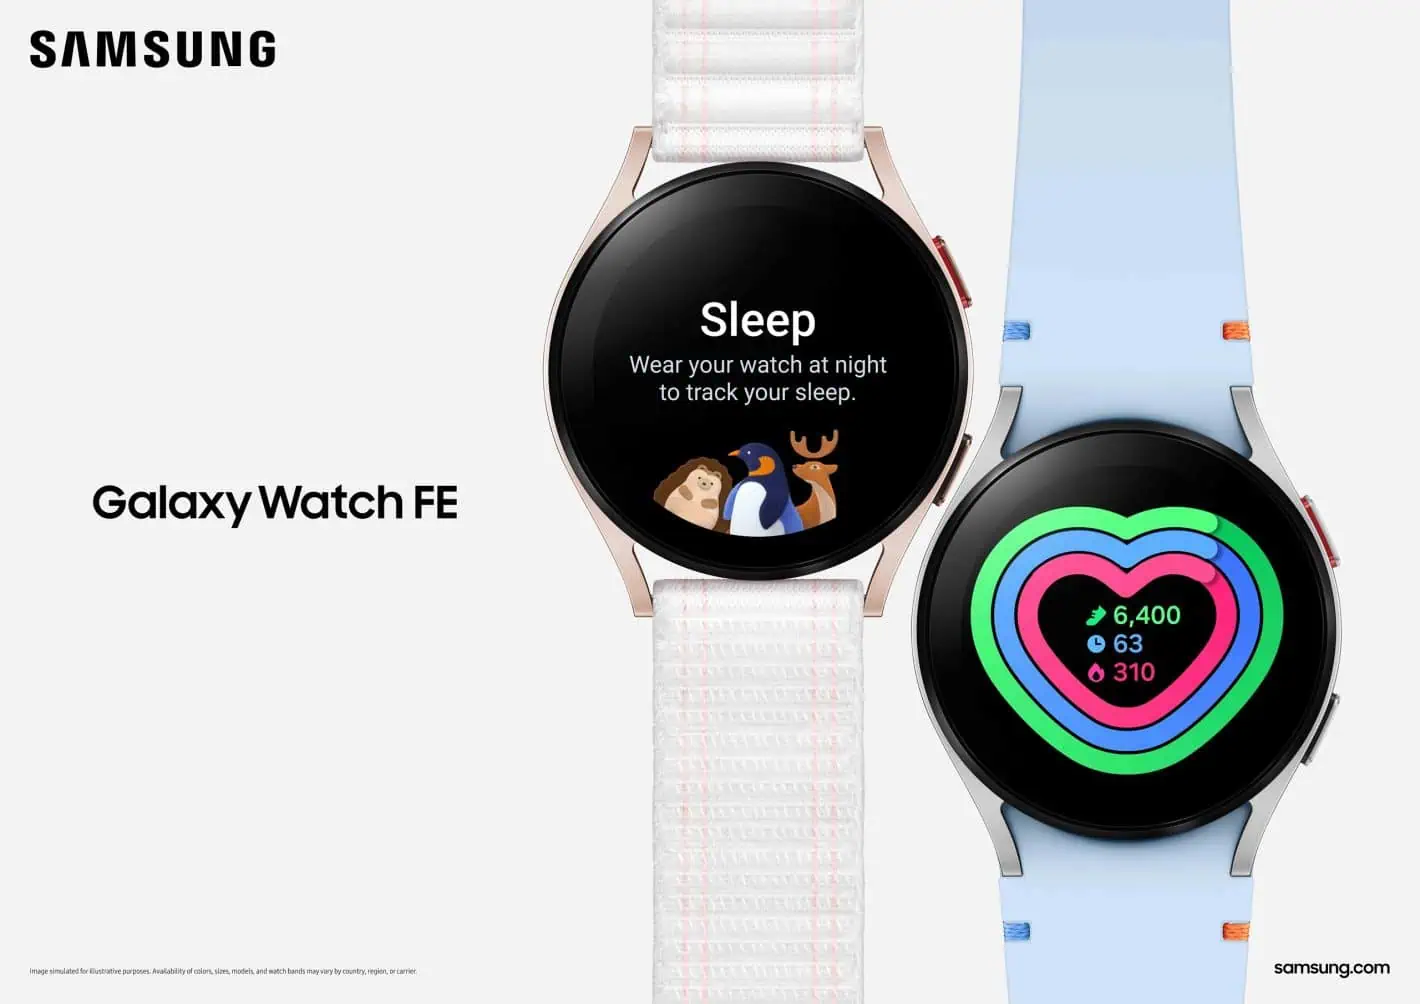 Featured image for Enough of leaks, Samsung officially launched the Galaxy Watch FE